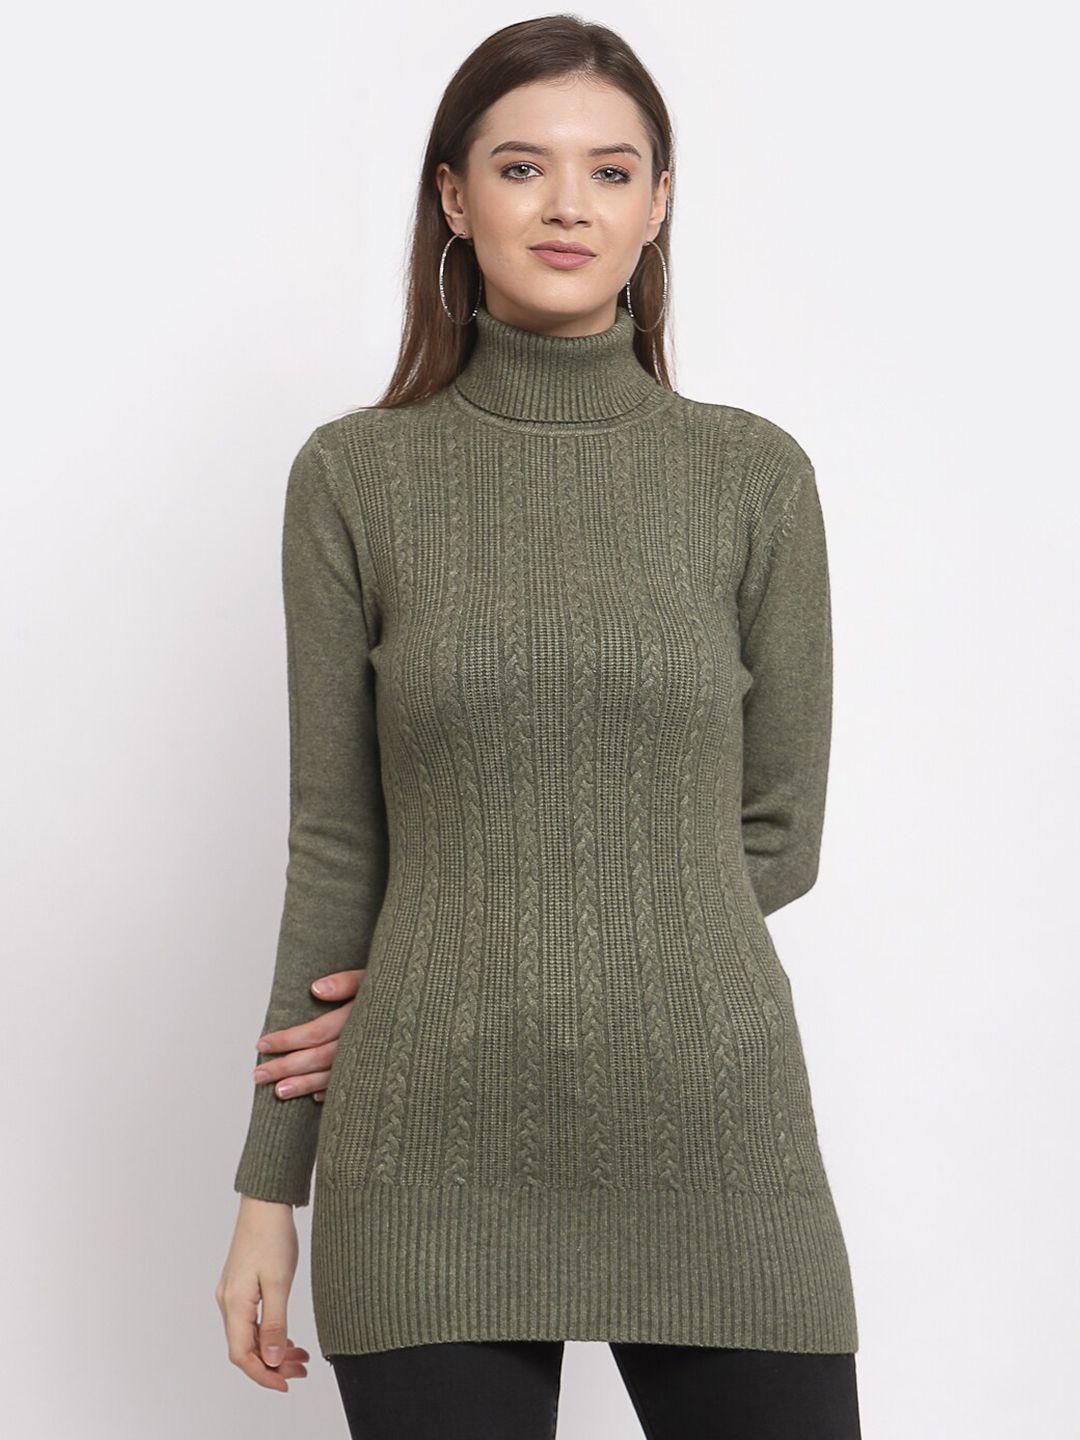 mafadeny-women-green-turtle-neck-long-cable-knit-sweater